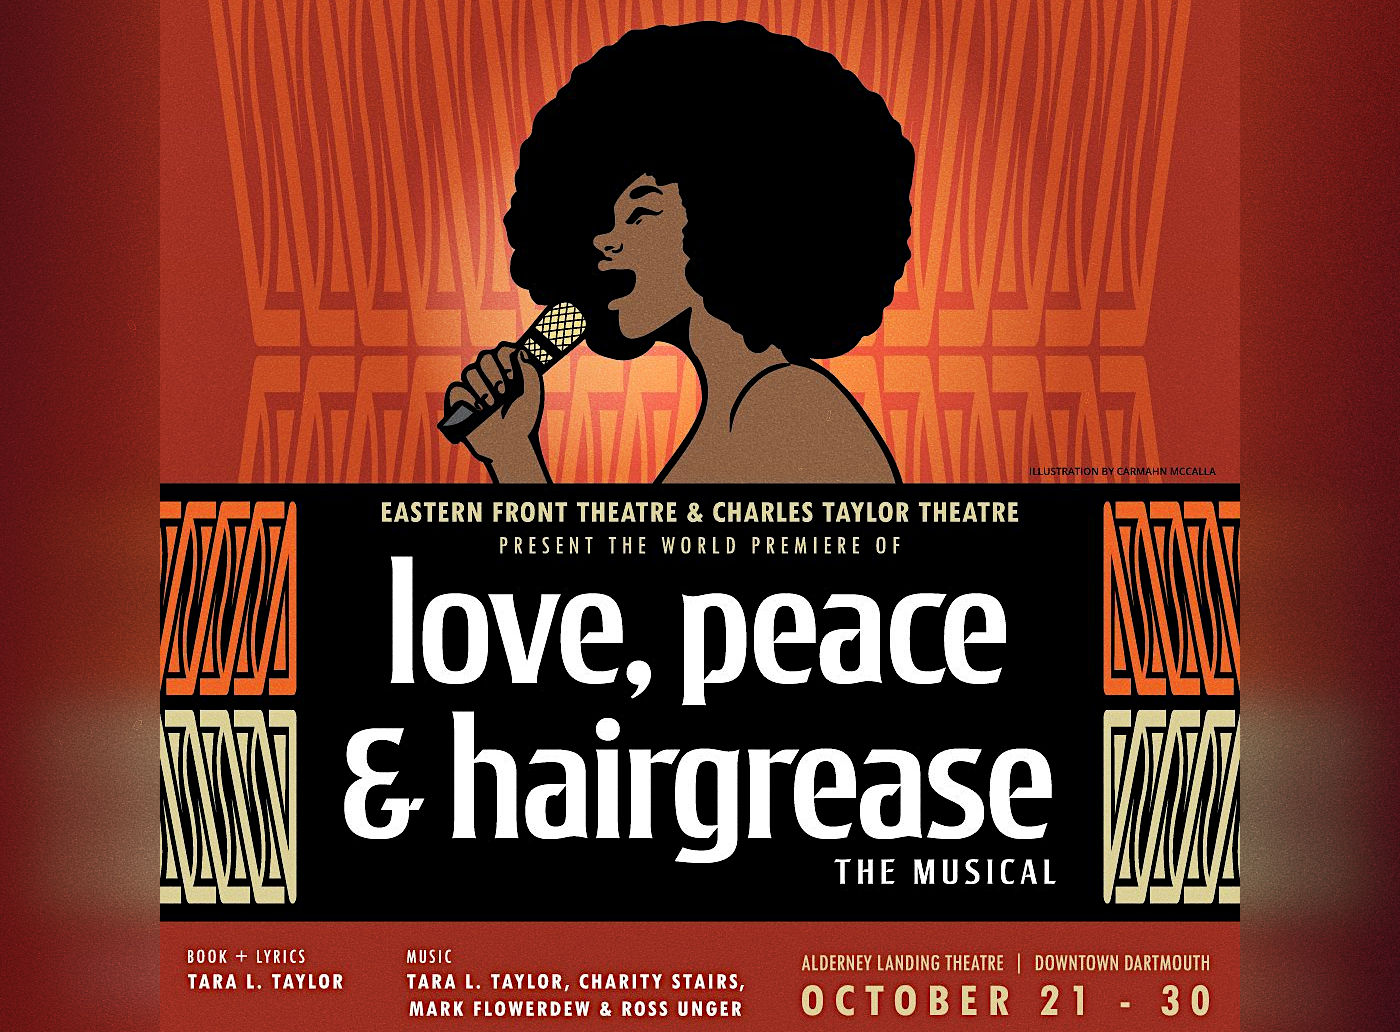 Poster for "Love, Peace and Hairgrease: The Musical"